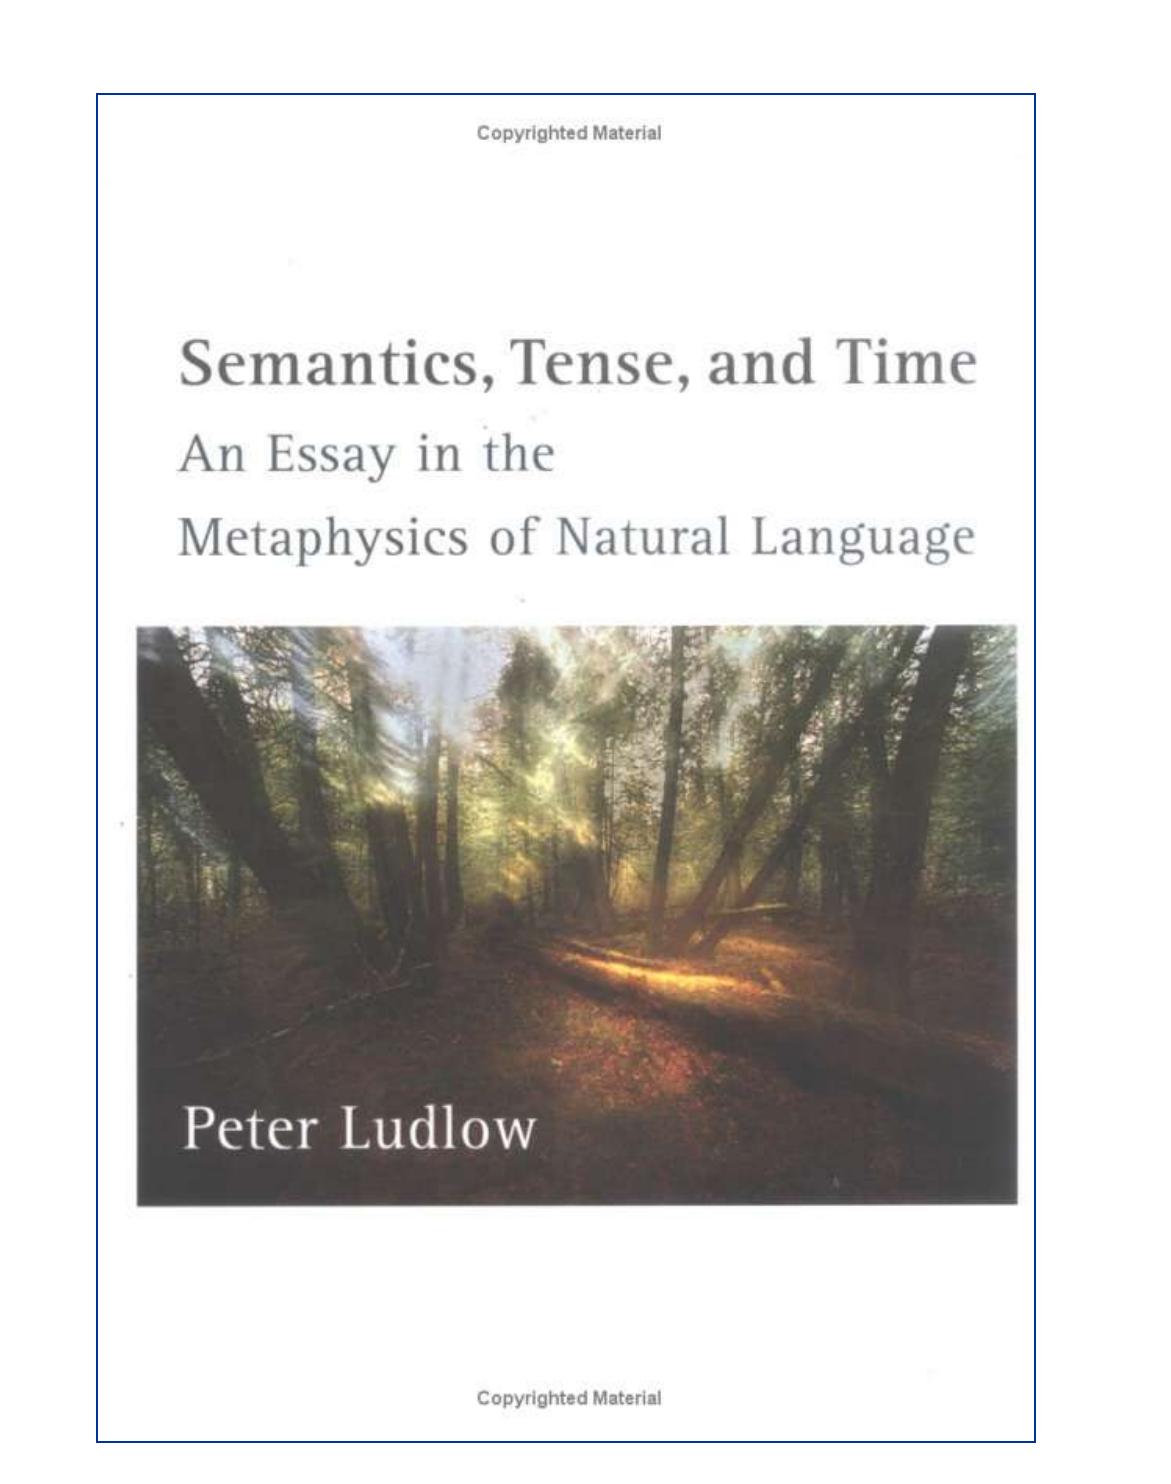 Semantics, Tense, and Time: An Essay in the Metaphysics of Natural Language